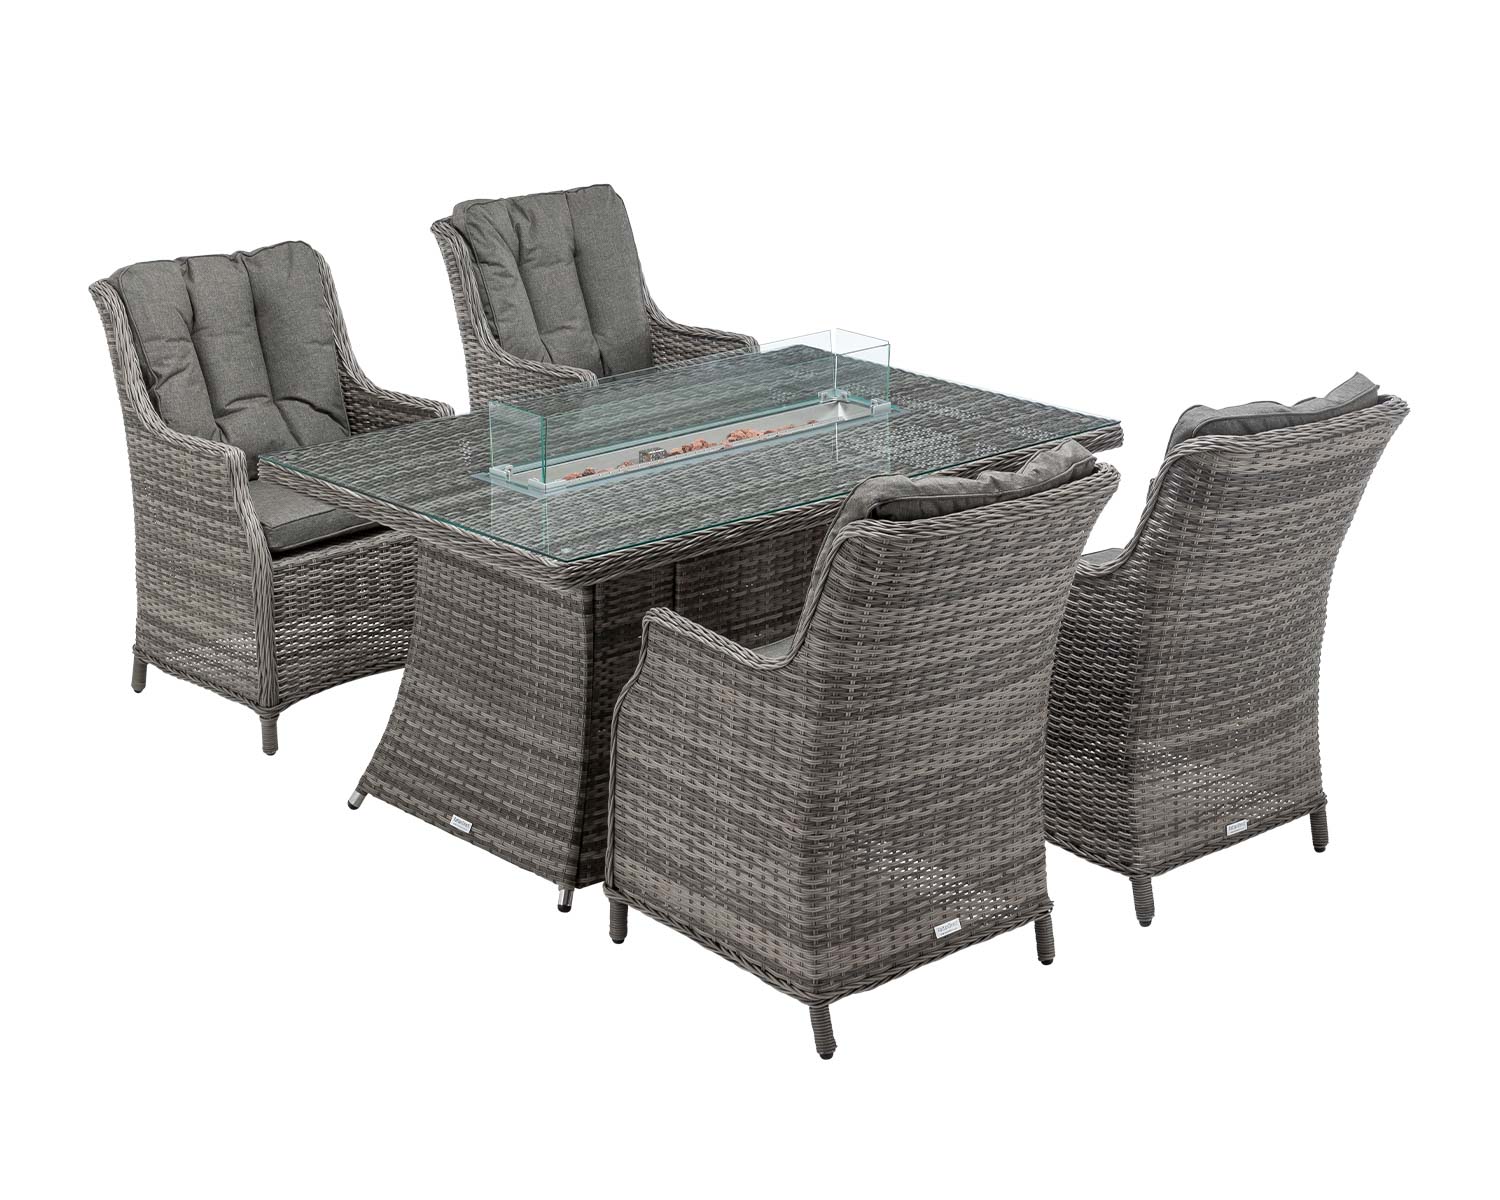 4 Seat Rattan Garden Dining Set With Rectangular Table In Grey With Fire Pit Riviera Rattan Direct